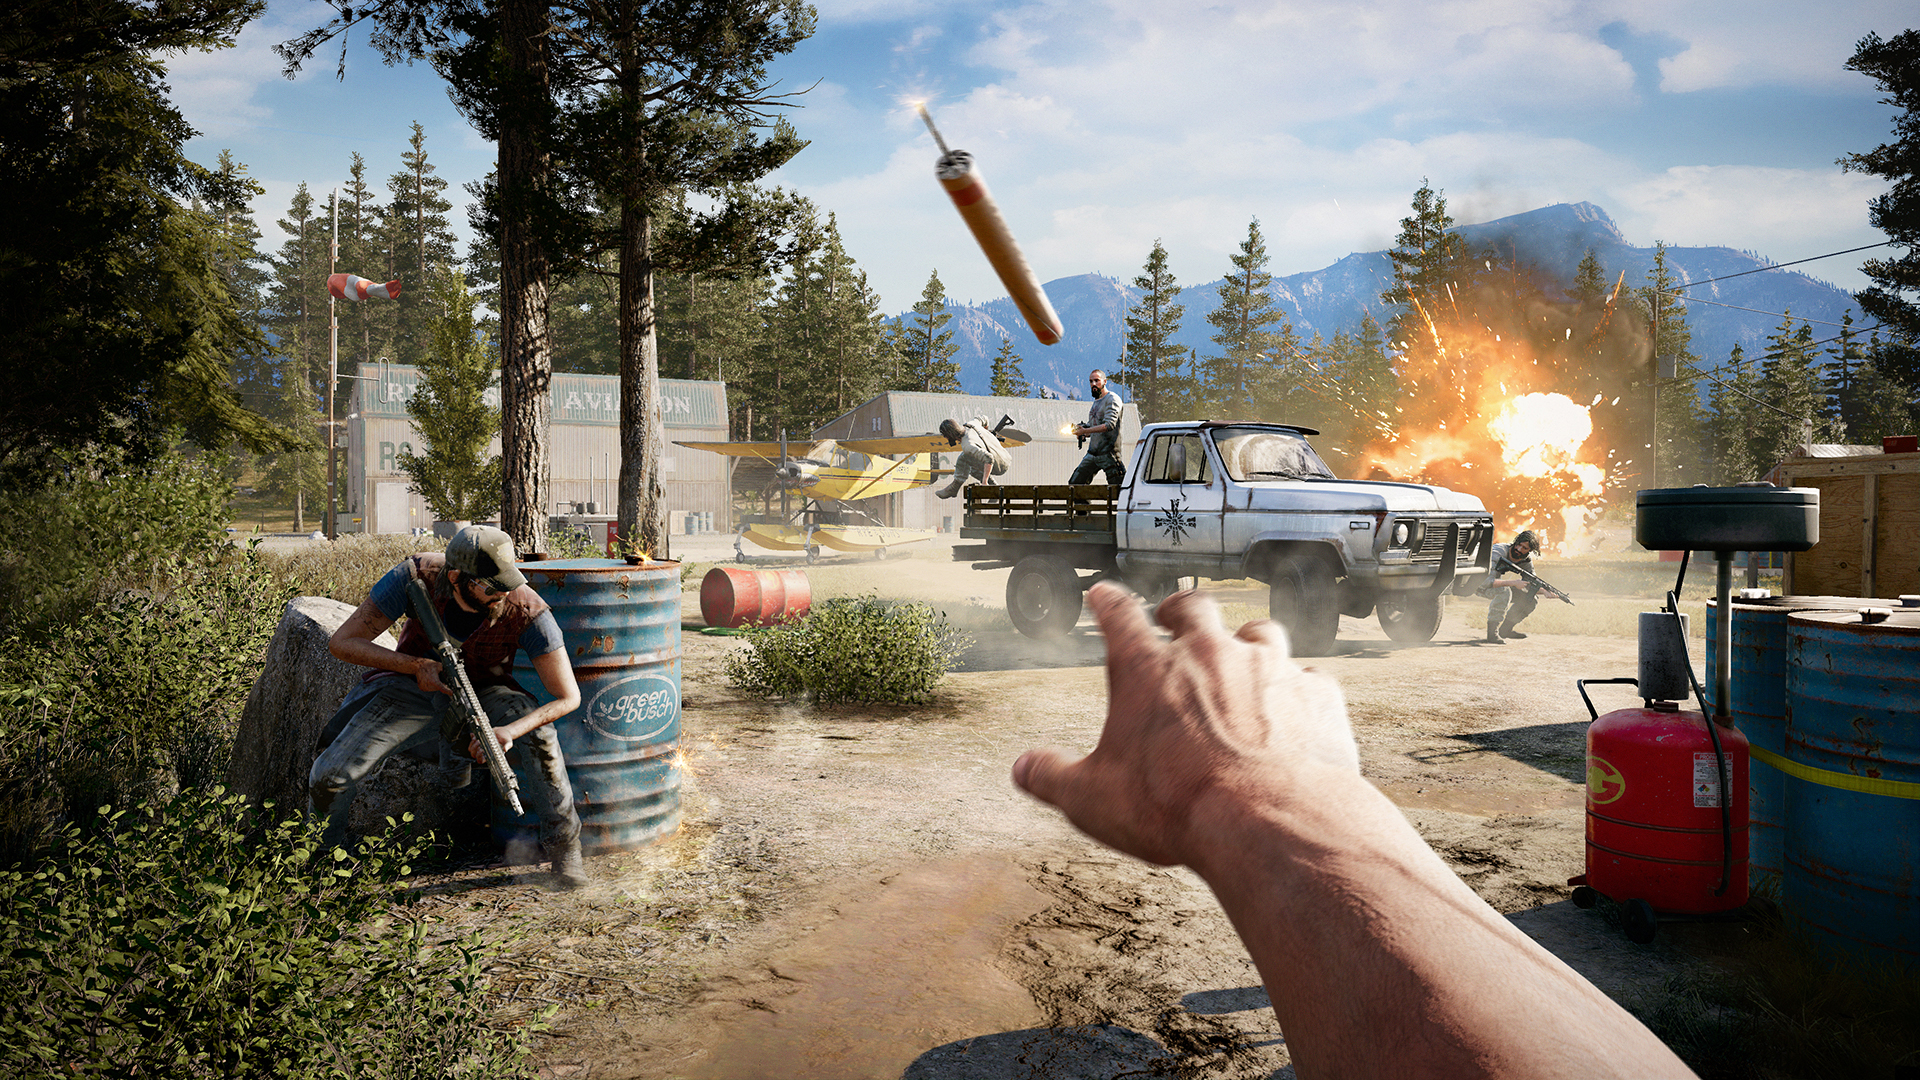 Far Cry 5 release date announced with new trailer